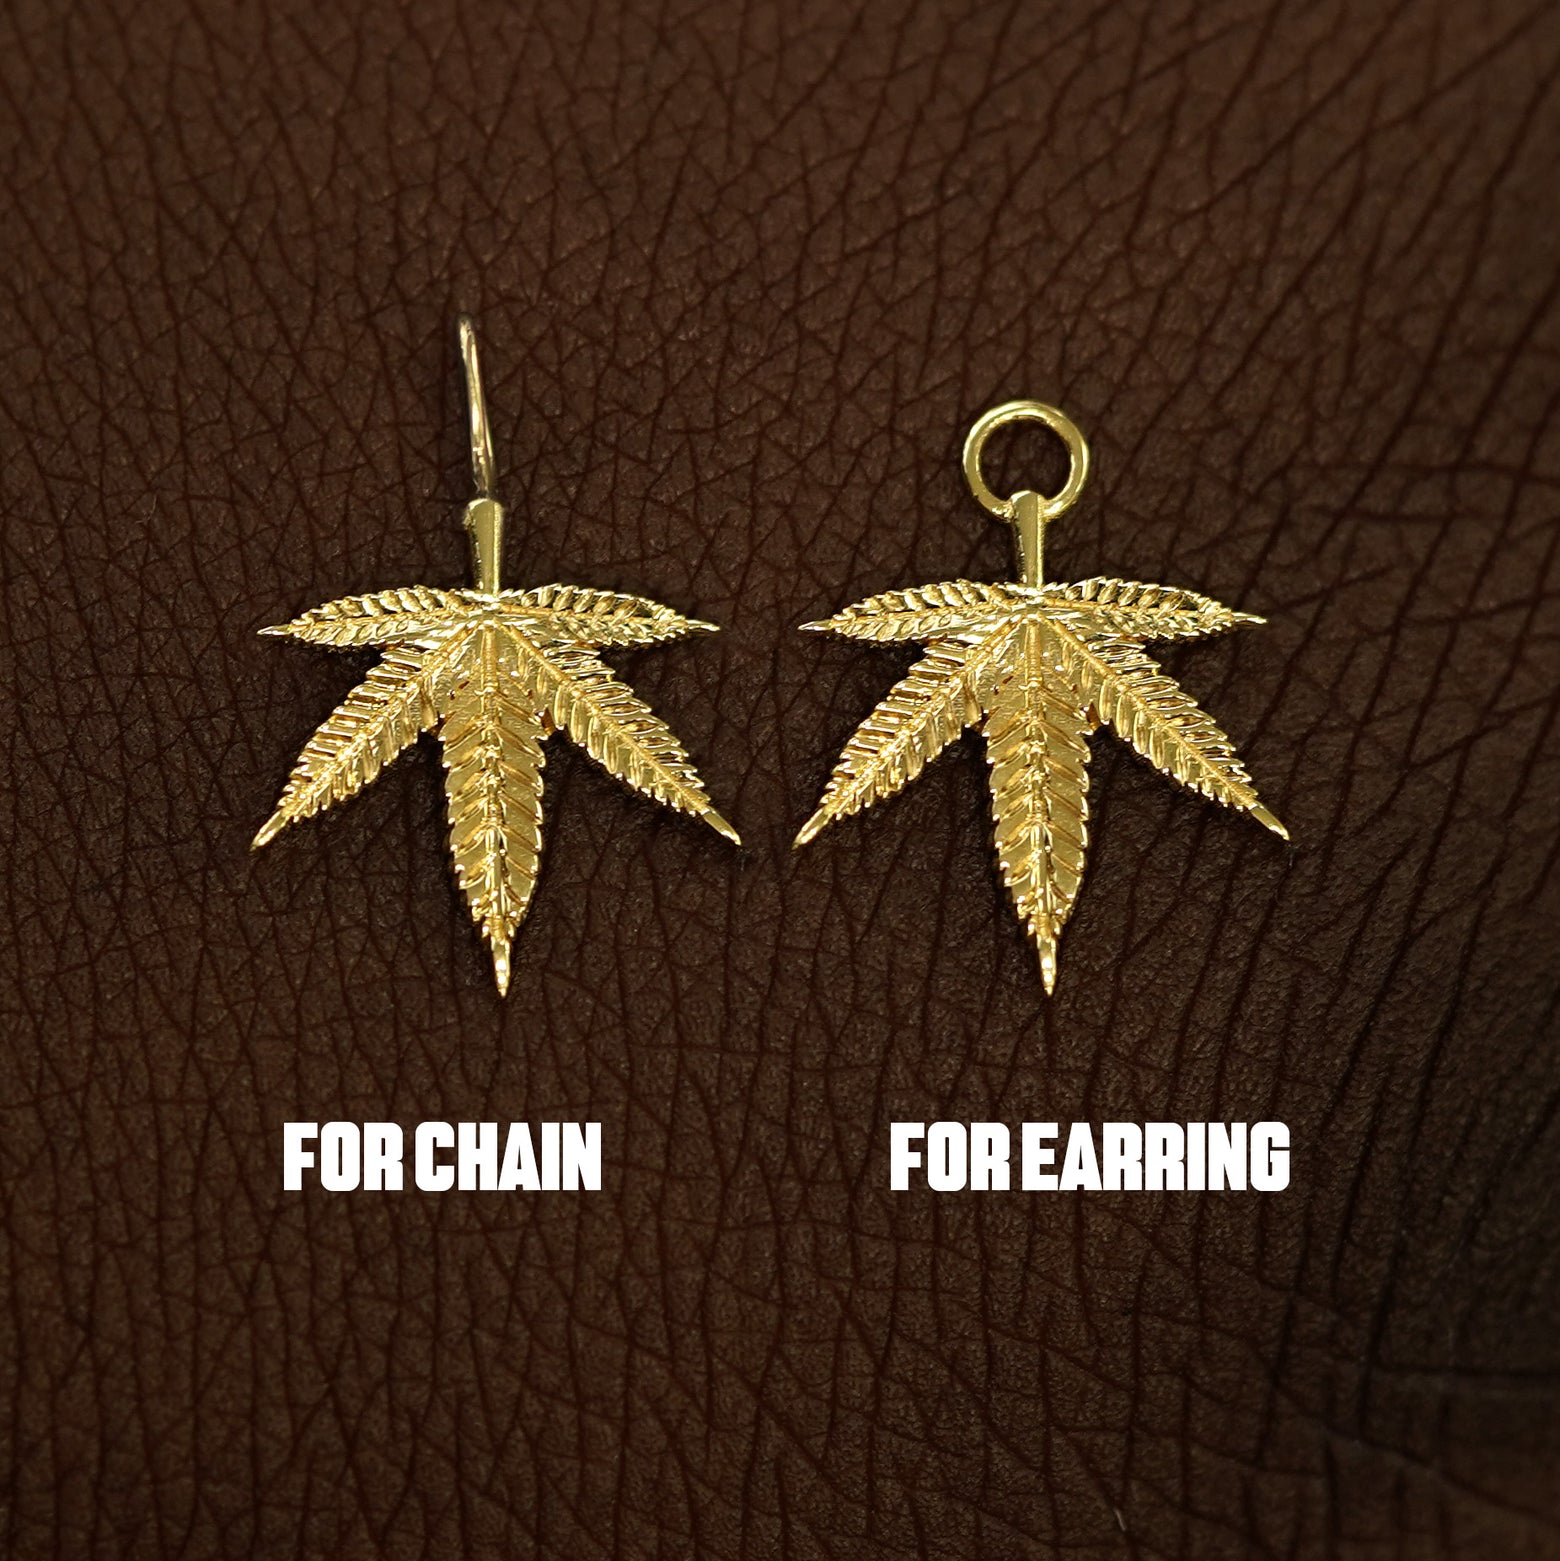 Two 14 karat solid gold Cannabis Charms shown in the For Chain and For Earring options